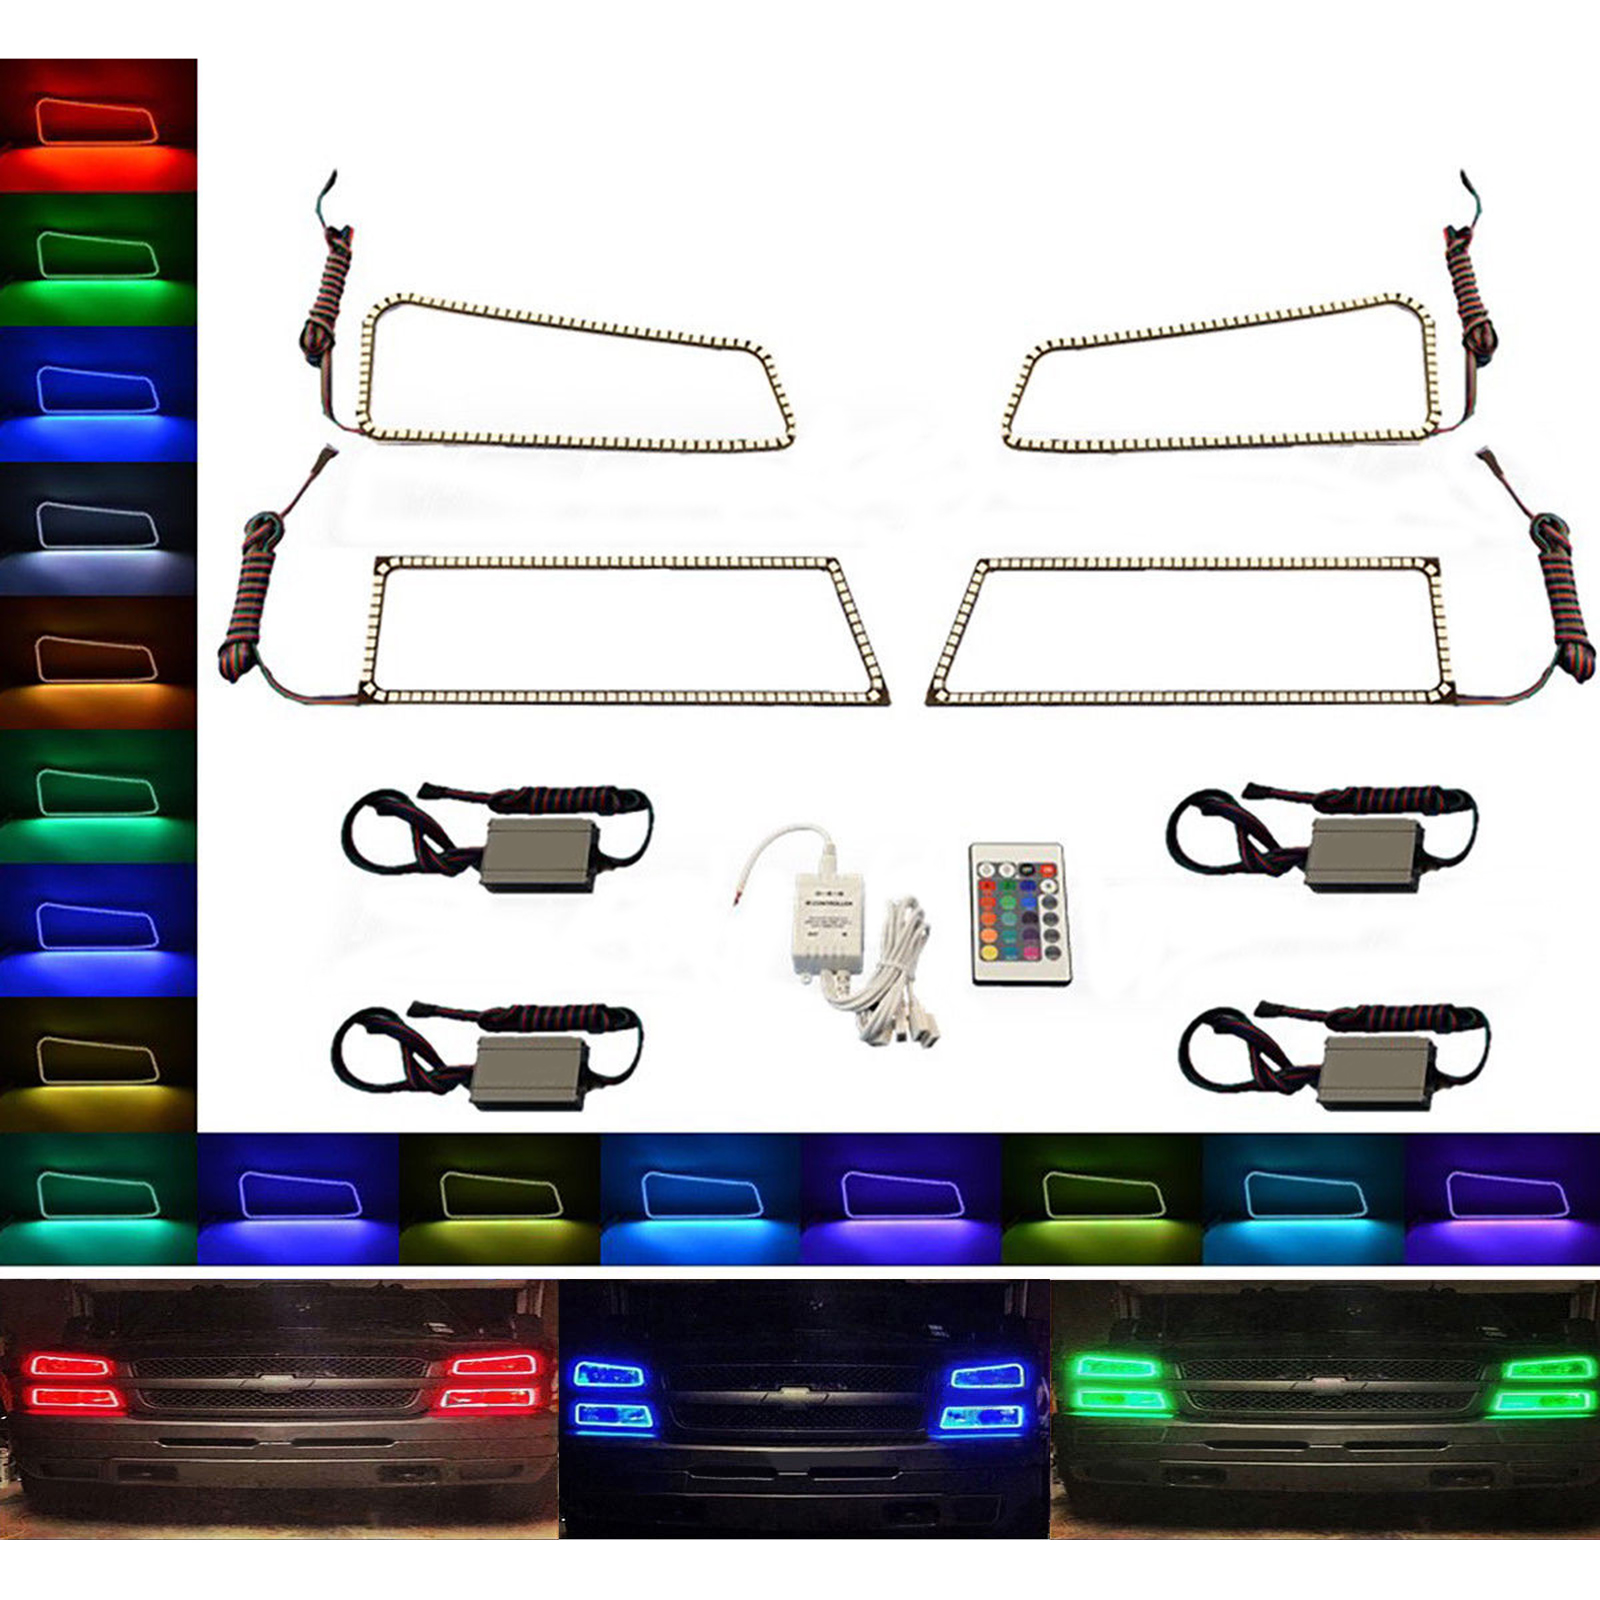 Download LED Headlight Halo Ring RGB Multi-Color Kit for Chevrolet Avalanche 03-06 Vintage Car & Truck ...